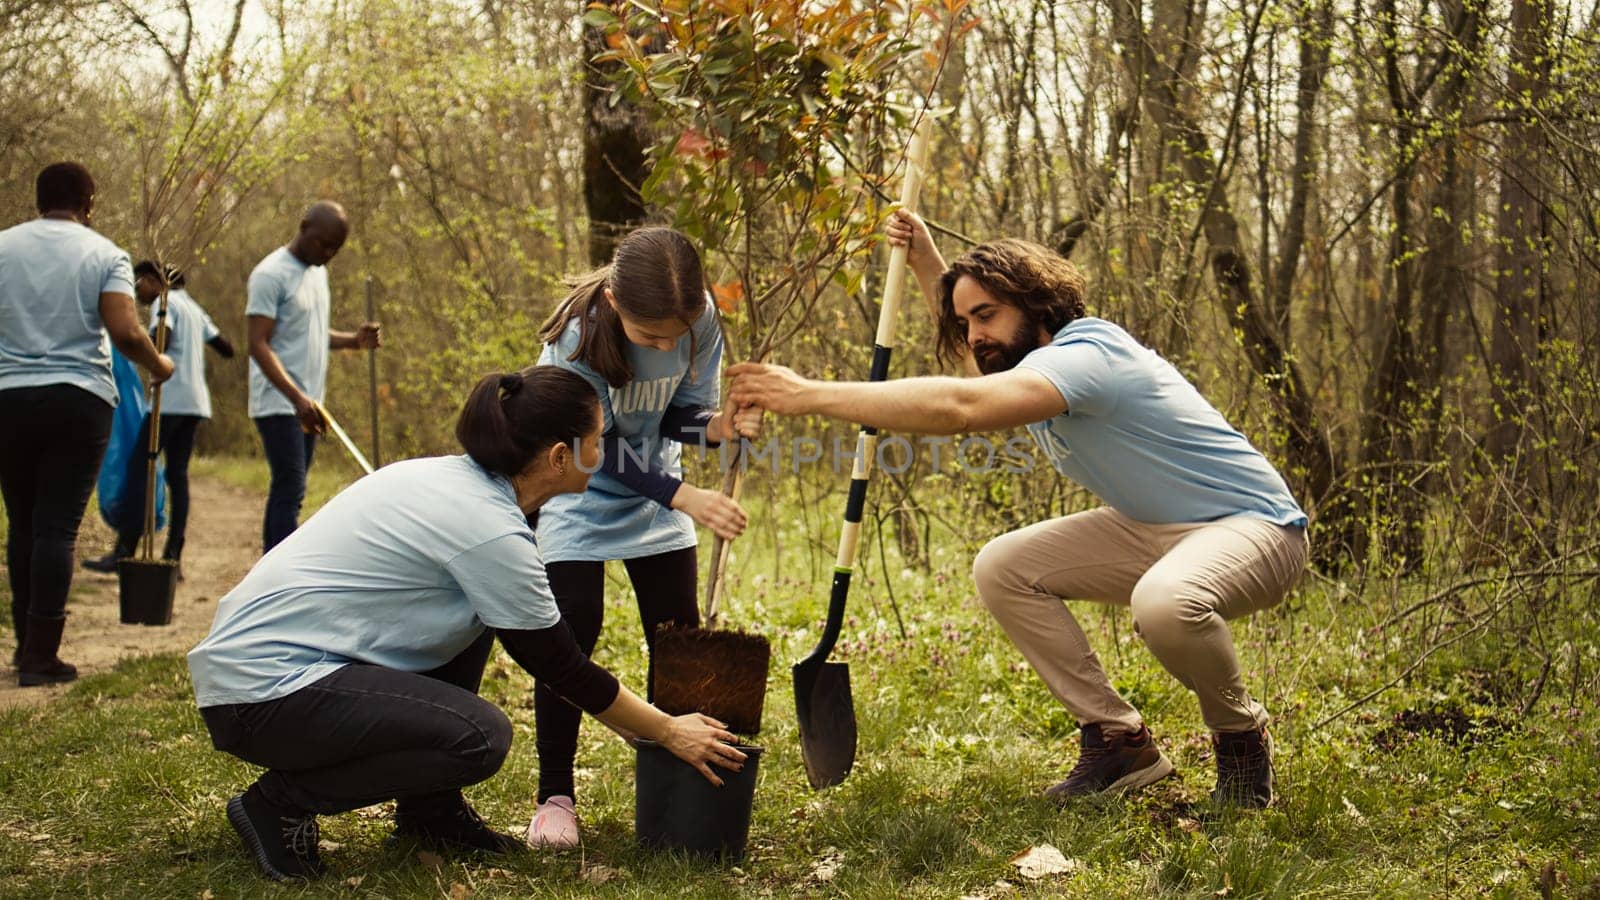 Team of volunteers planting trees around forest area for nature preservation and protection, doing voluntary work for a conservation project. Climate change activists plant seedlings. Camera B.